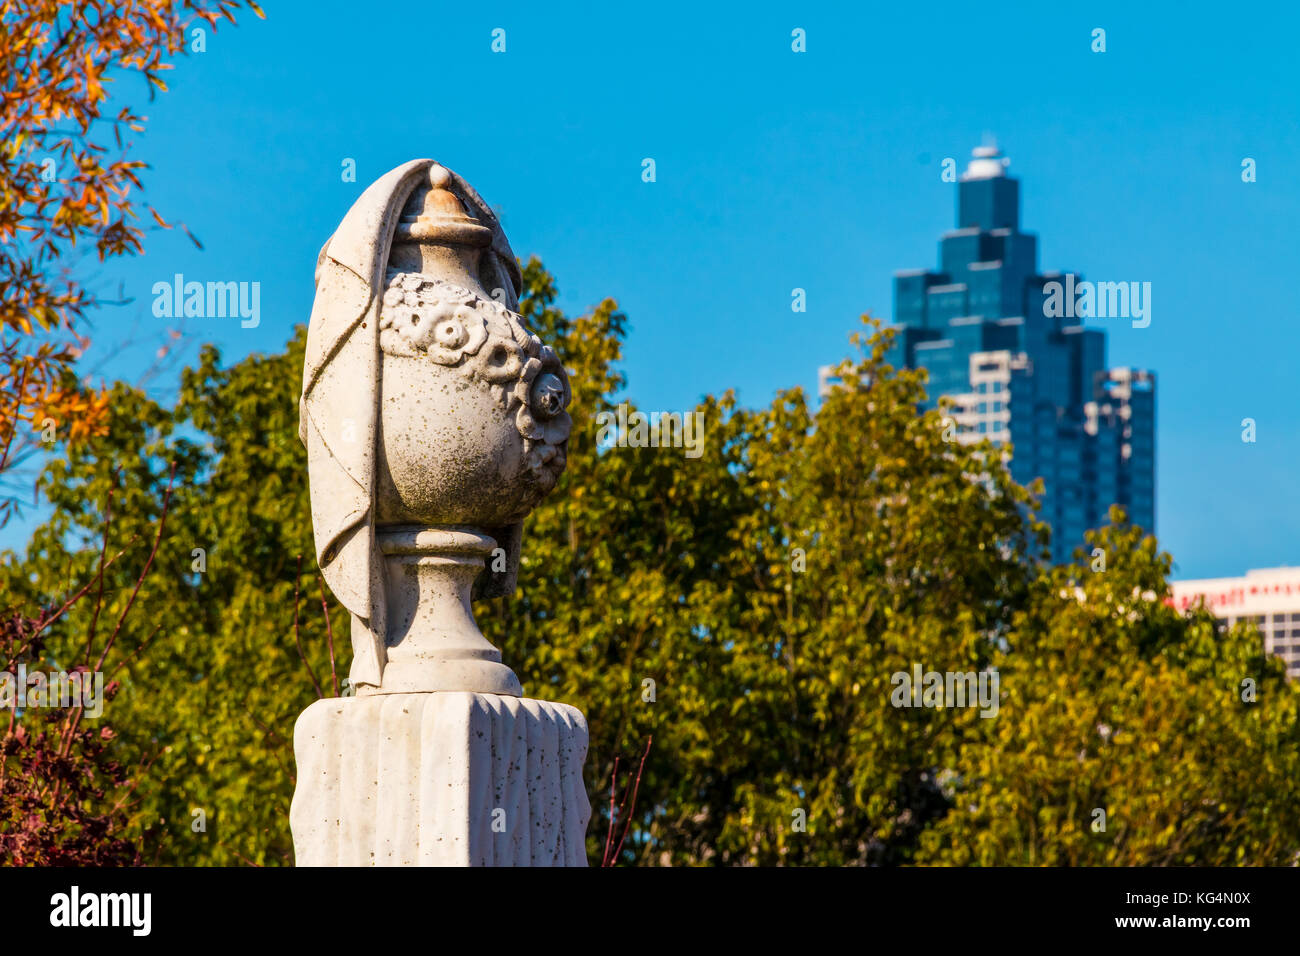 The gypseous sculpture of funeral urn on the Oakland Cemetery in sunny autumn day, Atlanta, USA Stock Photo